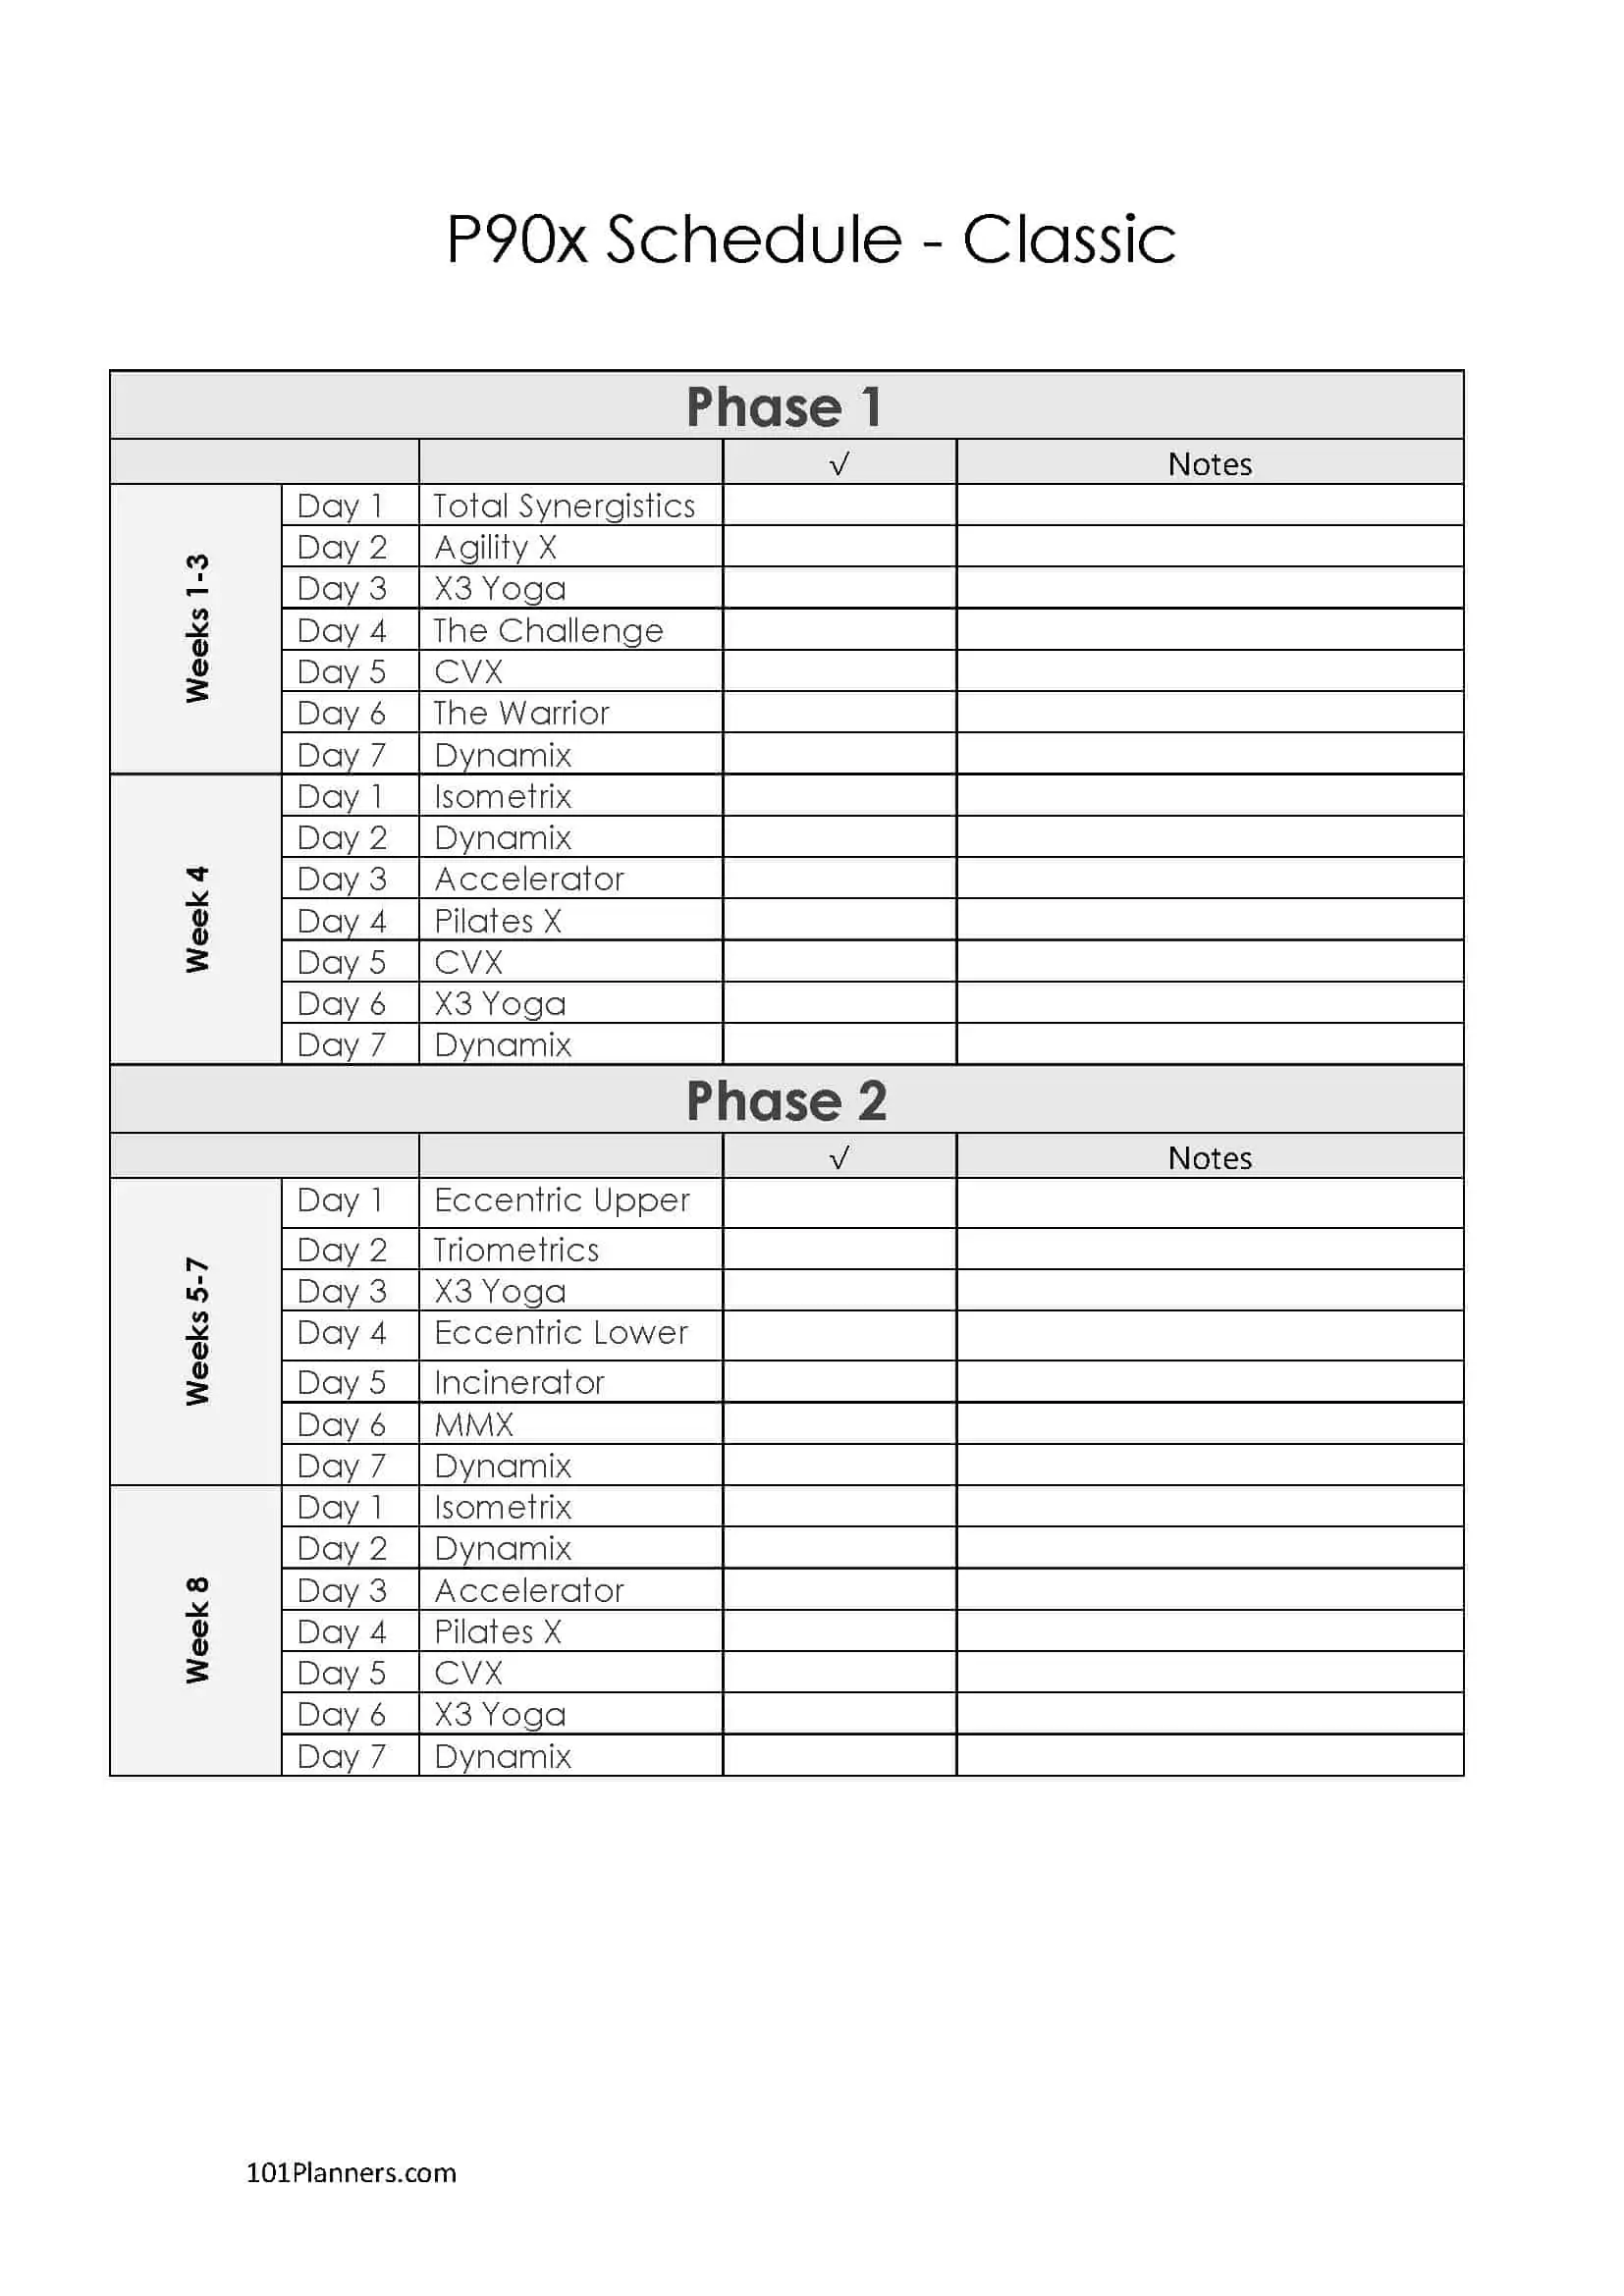 Printable P90x Schedule For The Classic